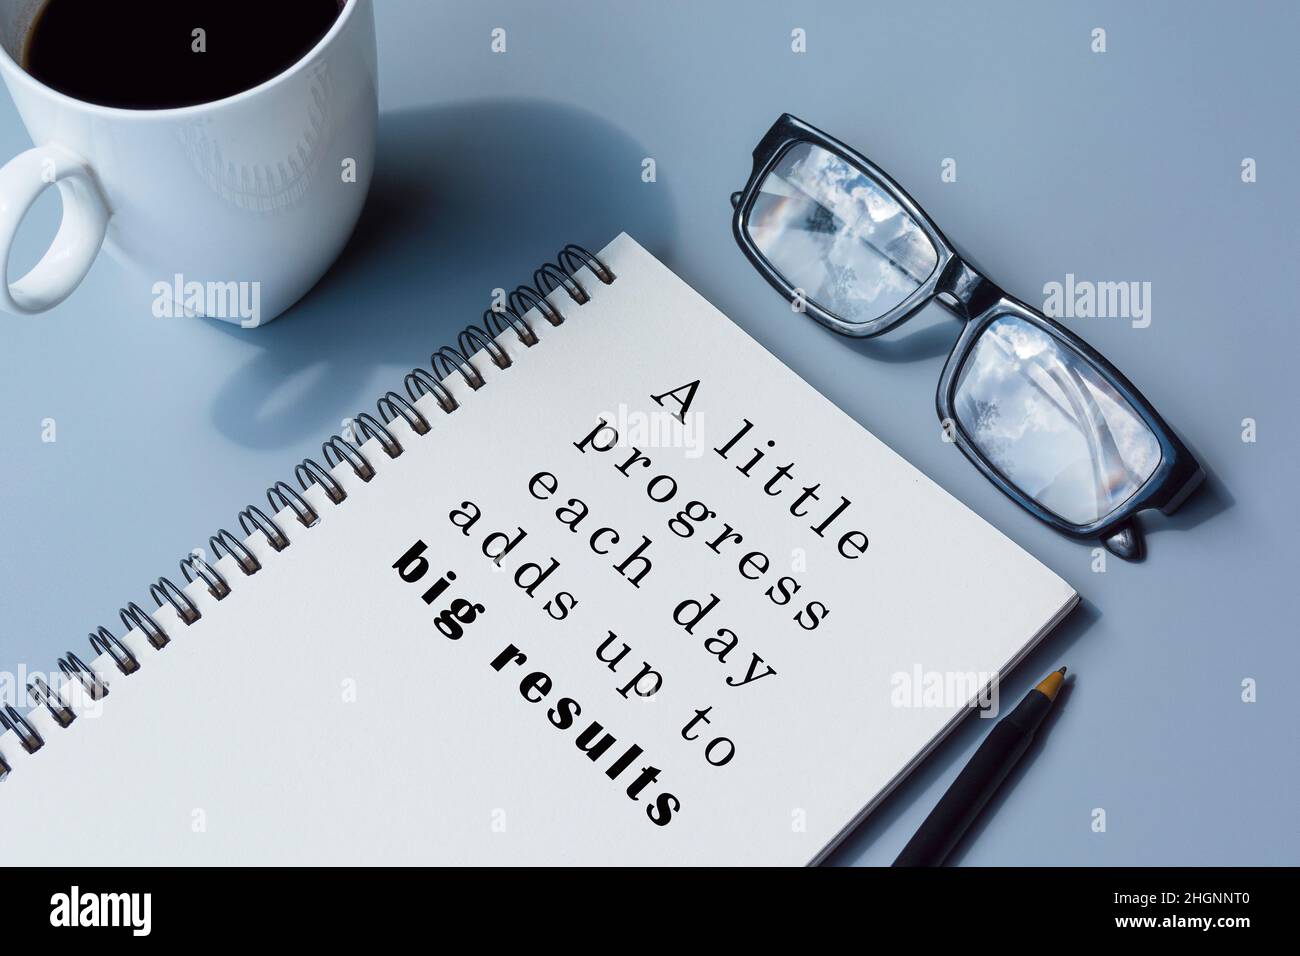 Motivational and inspirational quote on notepad with coffee, pen and glasses Stock Photo